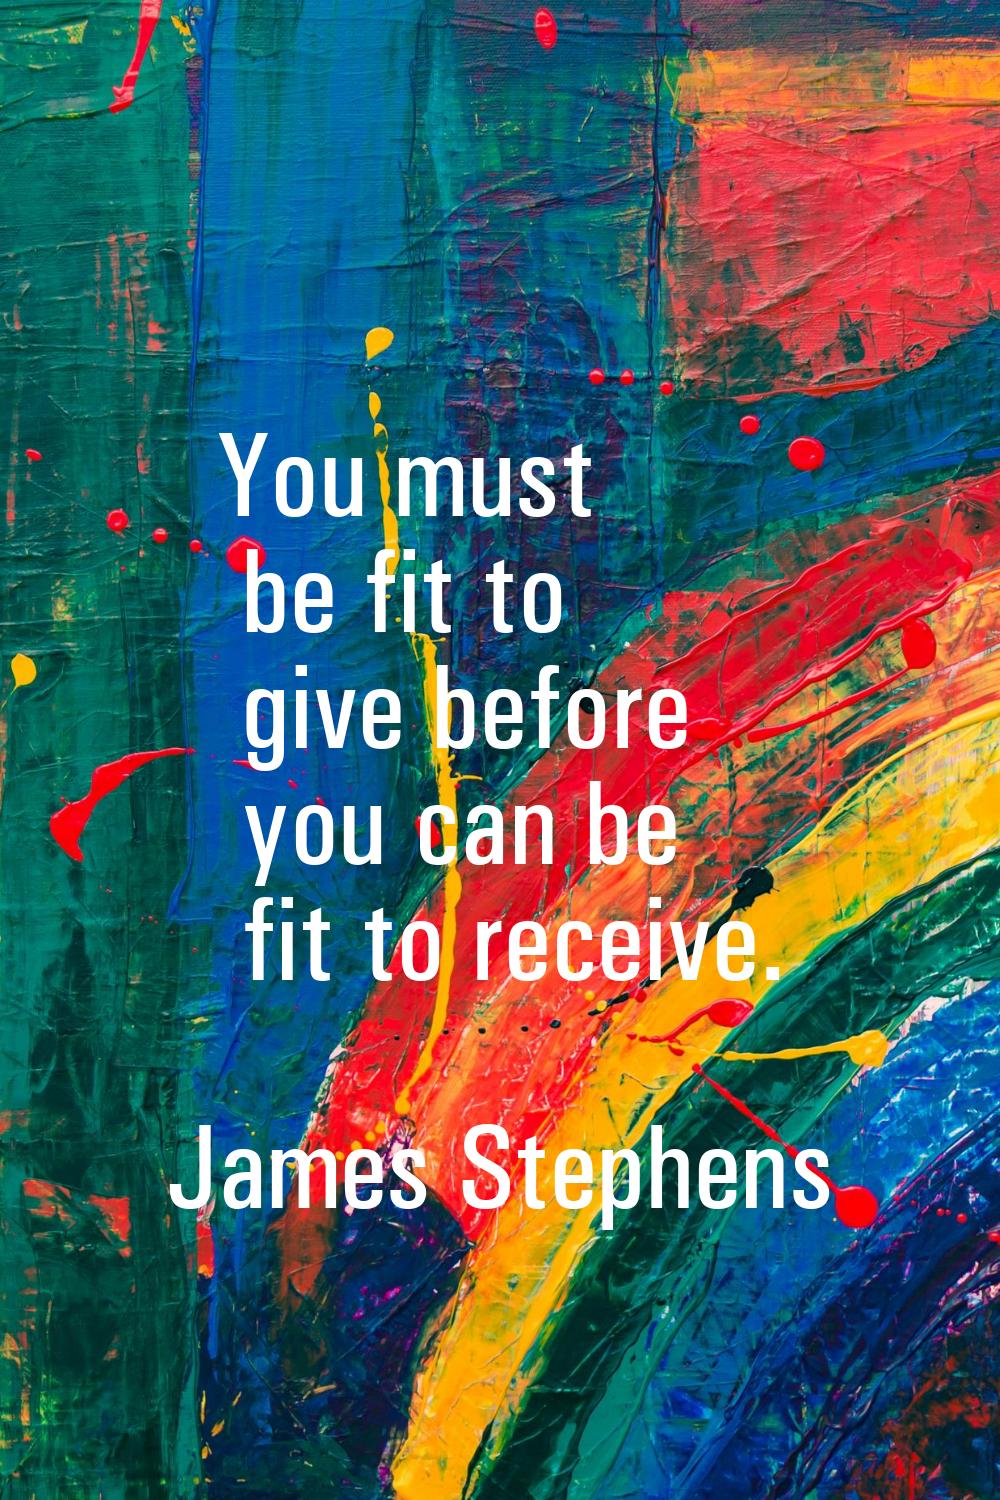 You must be fit to give before you can be fit to receive.